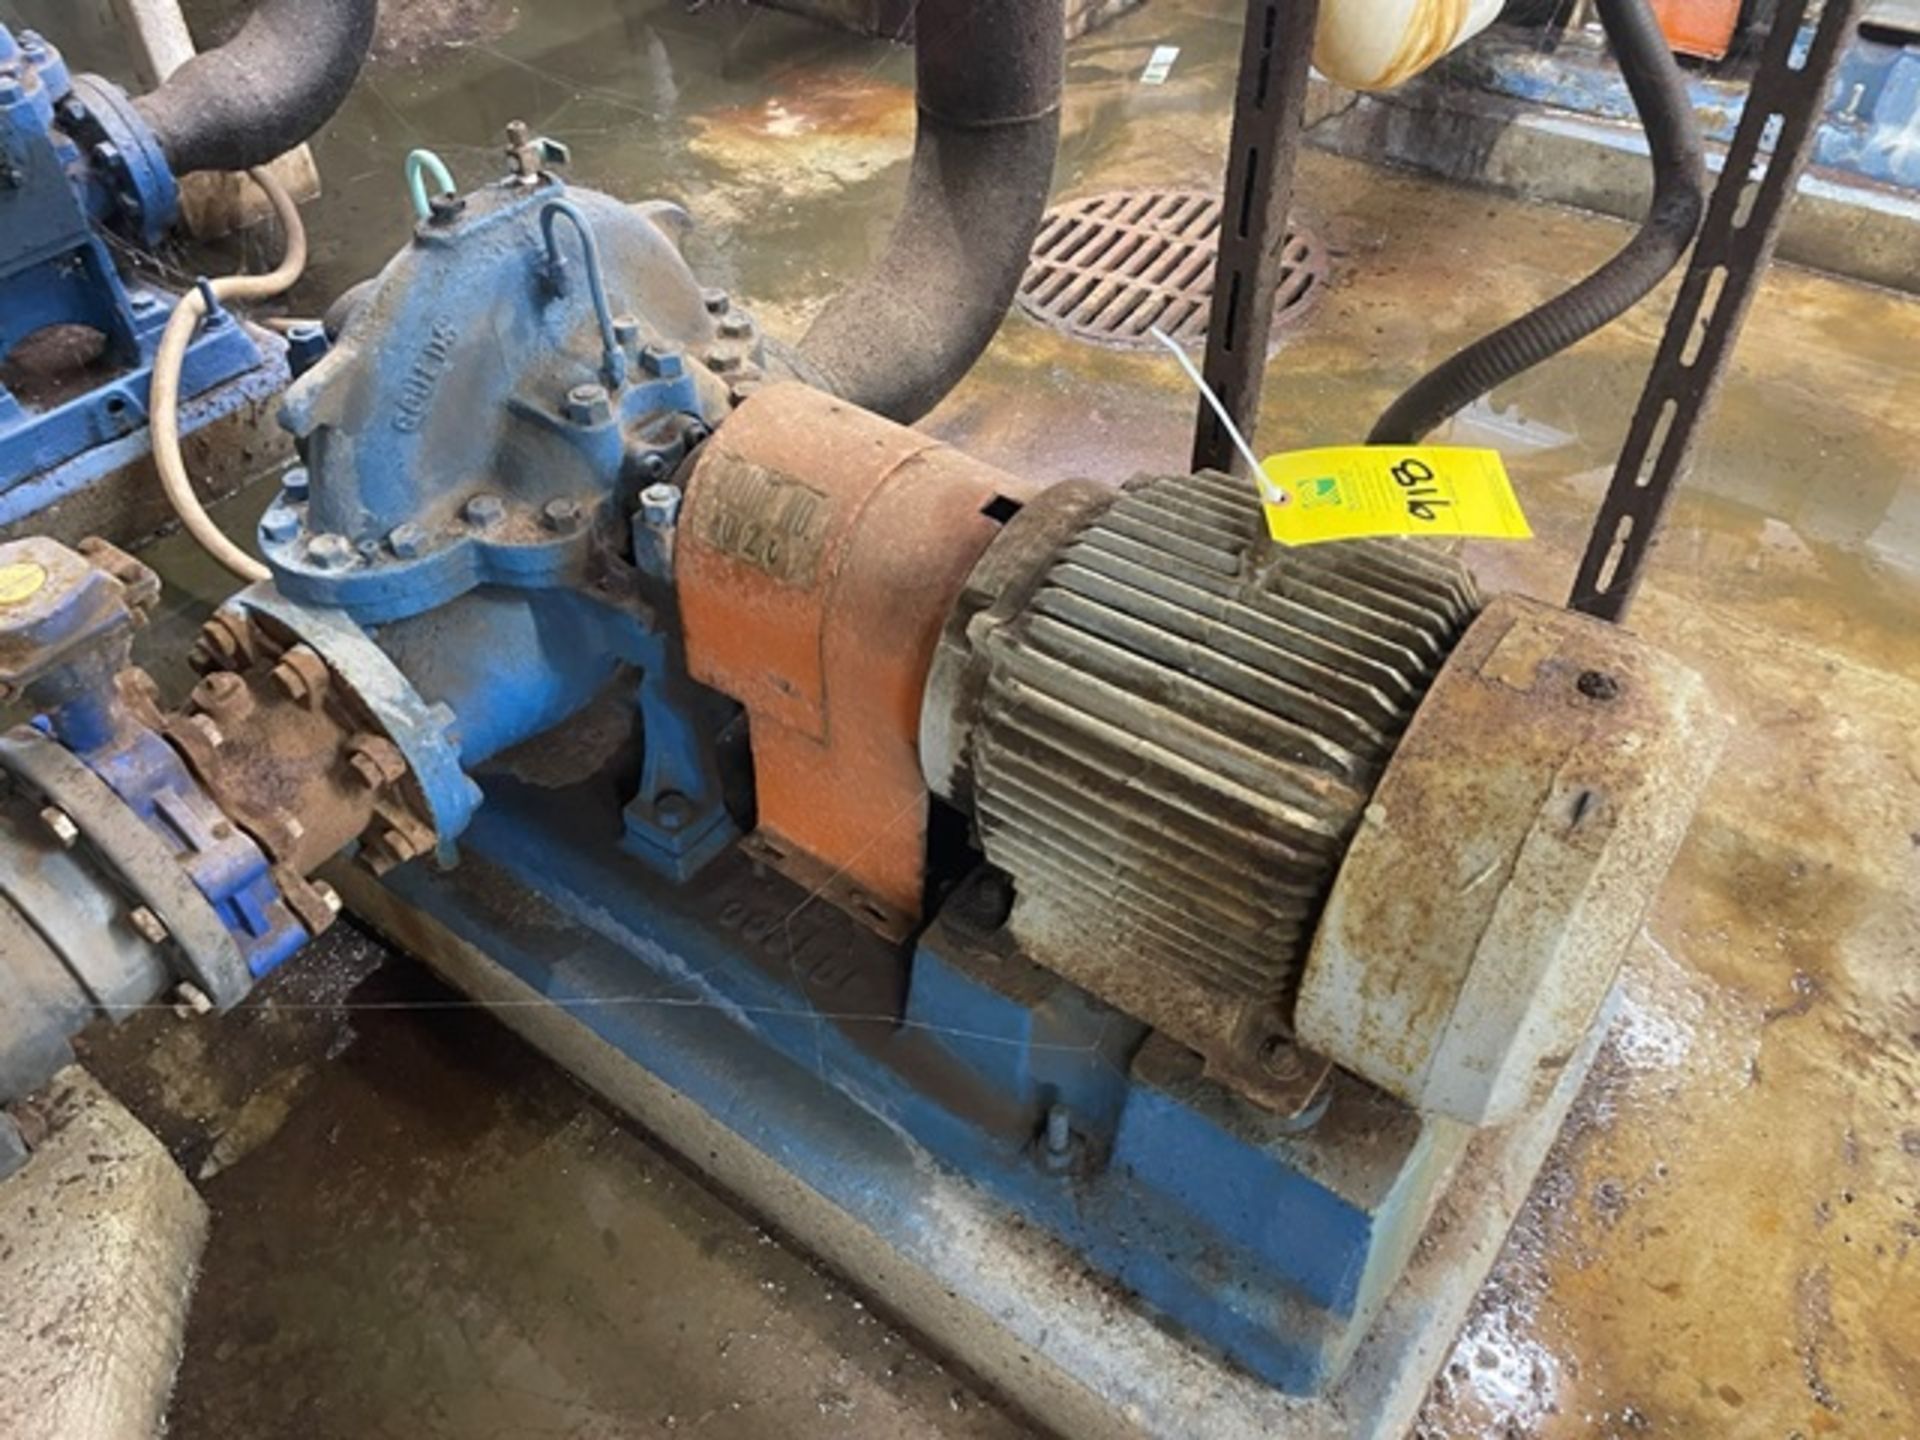 Reliant Believed 20 HP Motor & Pump., Rigging & Loading Fee: $300 - Image 2 of 2